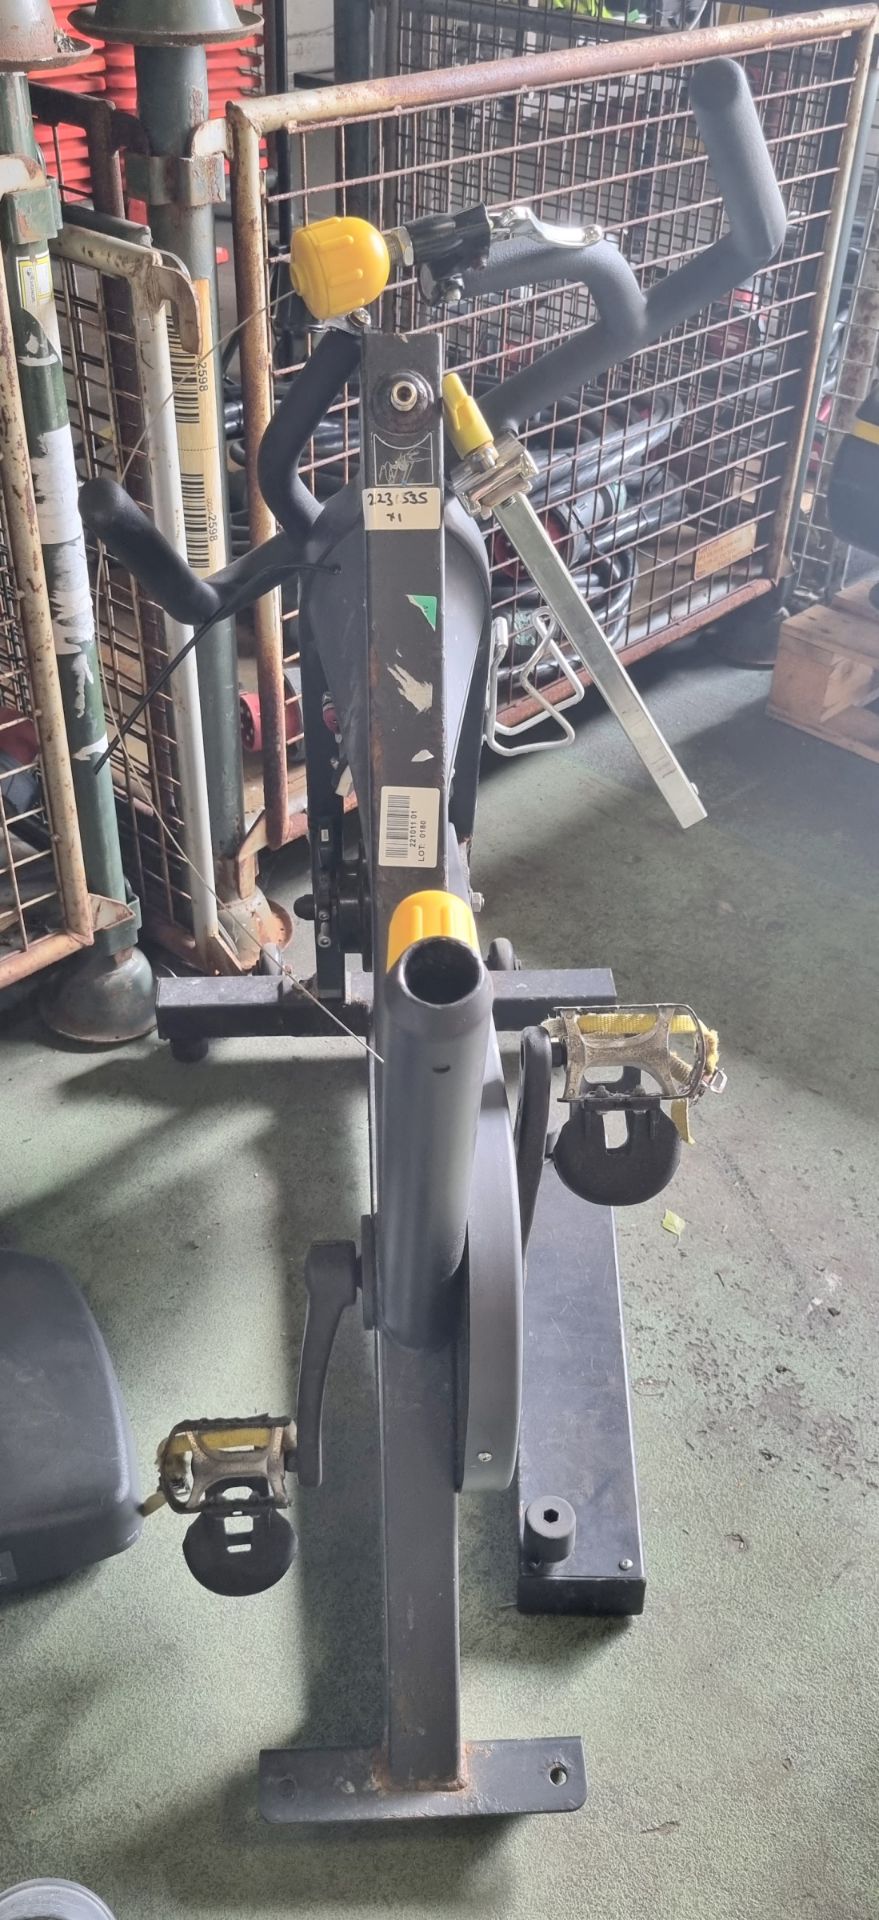 Pulse fitness group cycle Spin bike L 100 x W 50 x H 120 cm - AS SPARES OR REPAIRS - Image 2 of 4